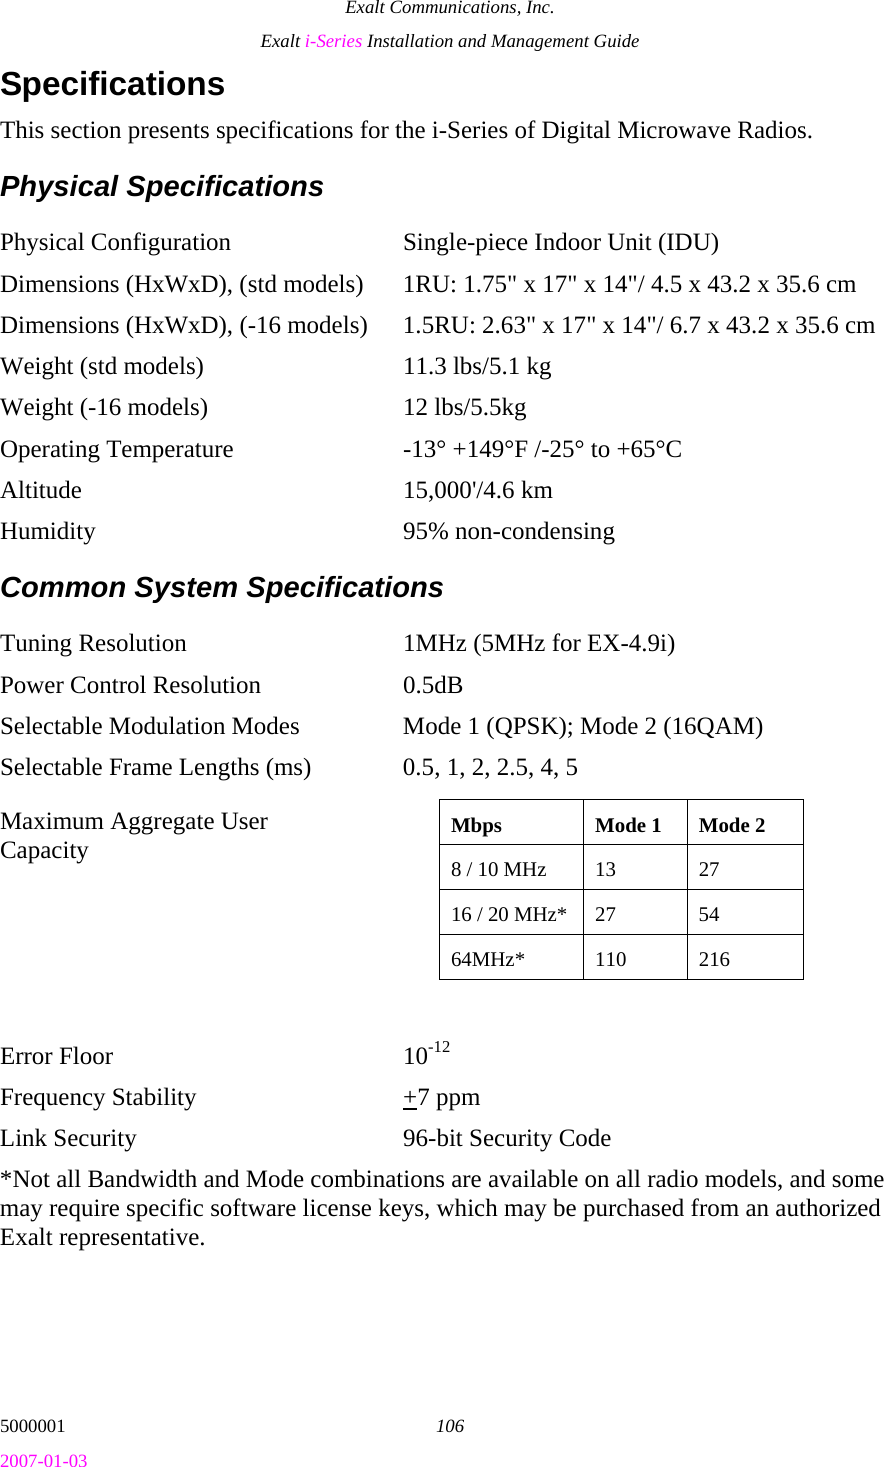 Exalt Communications, Inc. Exalt i-Series Installation and Management Guide 5000001  106 2007-01-03 Specifications This section presents specifications for the i-Series of Digital Microwave Radios. Physical Specifications Physical Configuration  Single-piece Indoor Unit (IDU) Dimensions (HxWxD), (std models)  1RU: 1.75&quot; x 17&quot; x 14&quot;/ 4.5 x 43.2 x 35.6 cm Dimensions (HxWxD), (-16 models)  1.5RU: 2.63&quot; x 17&quot; x 14&quot;/ 6.7 x 43.2 x 35.6 cm Weight (std models)  11.3 lbs/5.1 kg Weight (-16 models)  12 lbs/5.5kg Operating Temperature  -13° +149°F /-25° to +65°C Altitude 15,000&apos;/4.6 km  Humidity 95% non-condensing Common System Specifications Tuning Resolution  1MHz (5MHz for EX-4.9i) Power Control Resolution  0.5dB Selectable Modulation Modes  Mode 1 (QPSK); Mode 2 (16QAM) Selectable Frame Lengths (ms)  0.5, 1, 2, 2.5, 4, 5 Maximum Aggregate User Capacity      Error Floor  10-12 Frequency Stability  +7 ppm Link Security  96-bit Security Code *Not all Bandwidth and Mode combinations are available on all radio models, and some may require specific software license keys, which may be purchased from an authorized Exalt representative.  Mbps  Mode 1  Mode 2 8 / 10 MHz  13  27 16 / 20 MHz*  27  54 64MHz* 110 216 